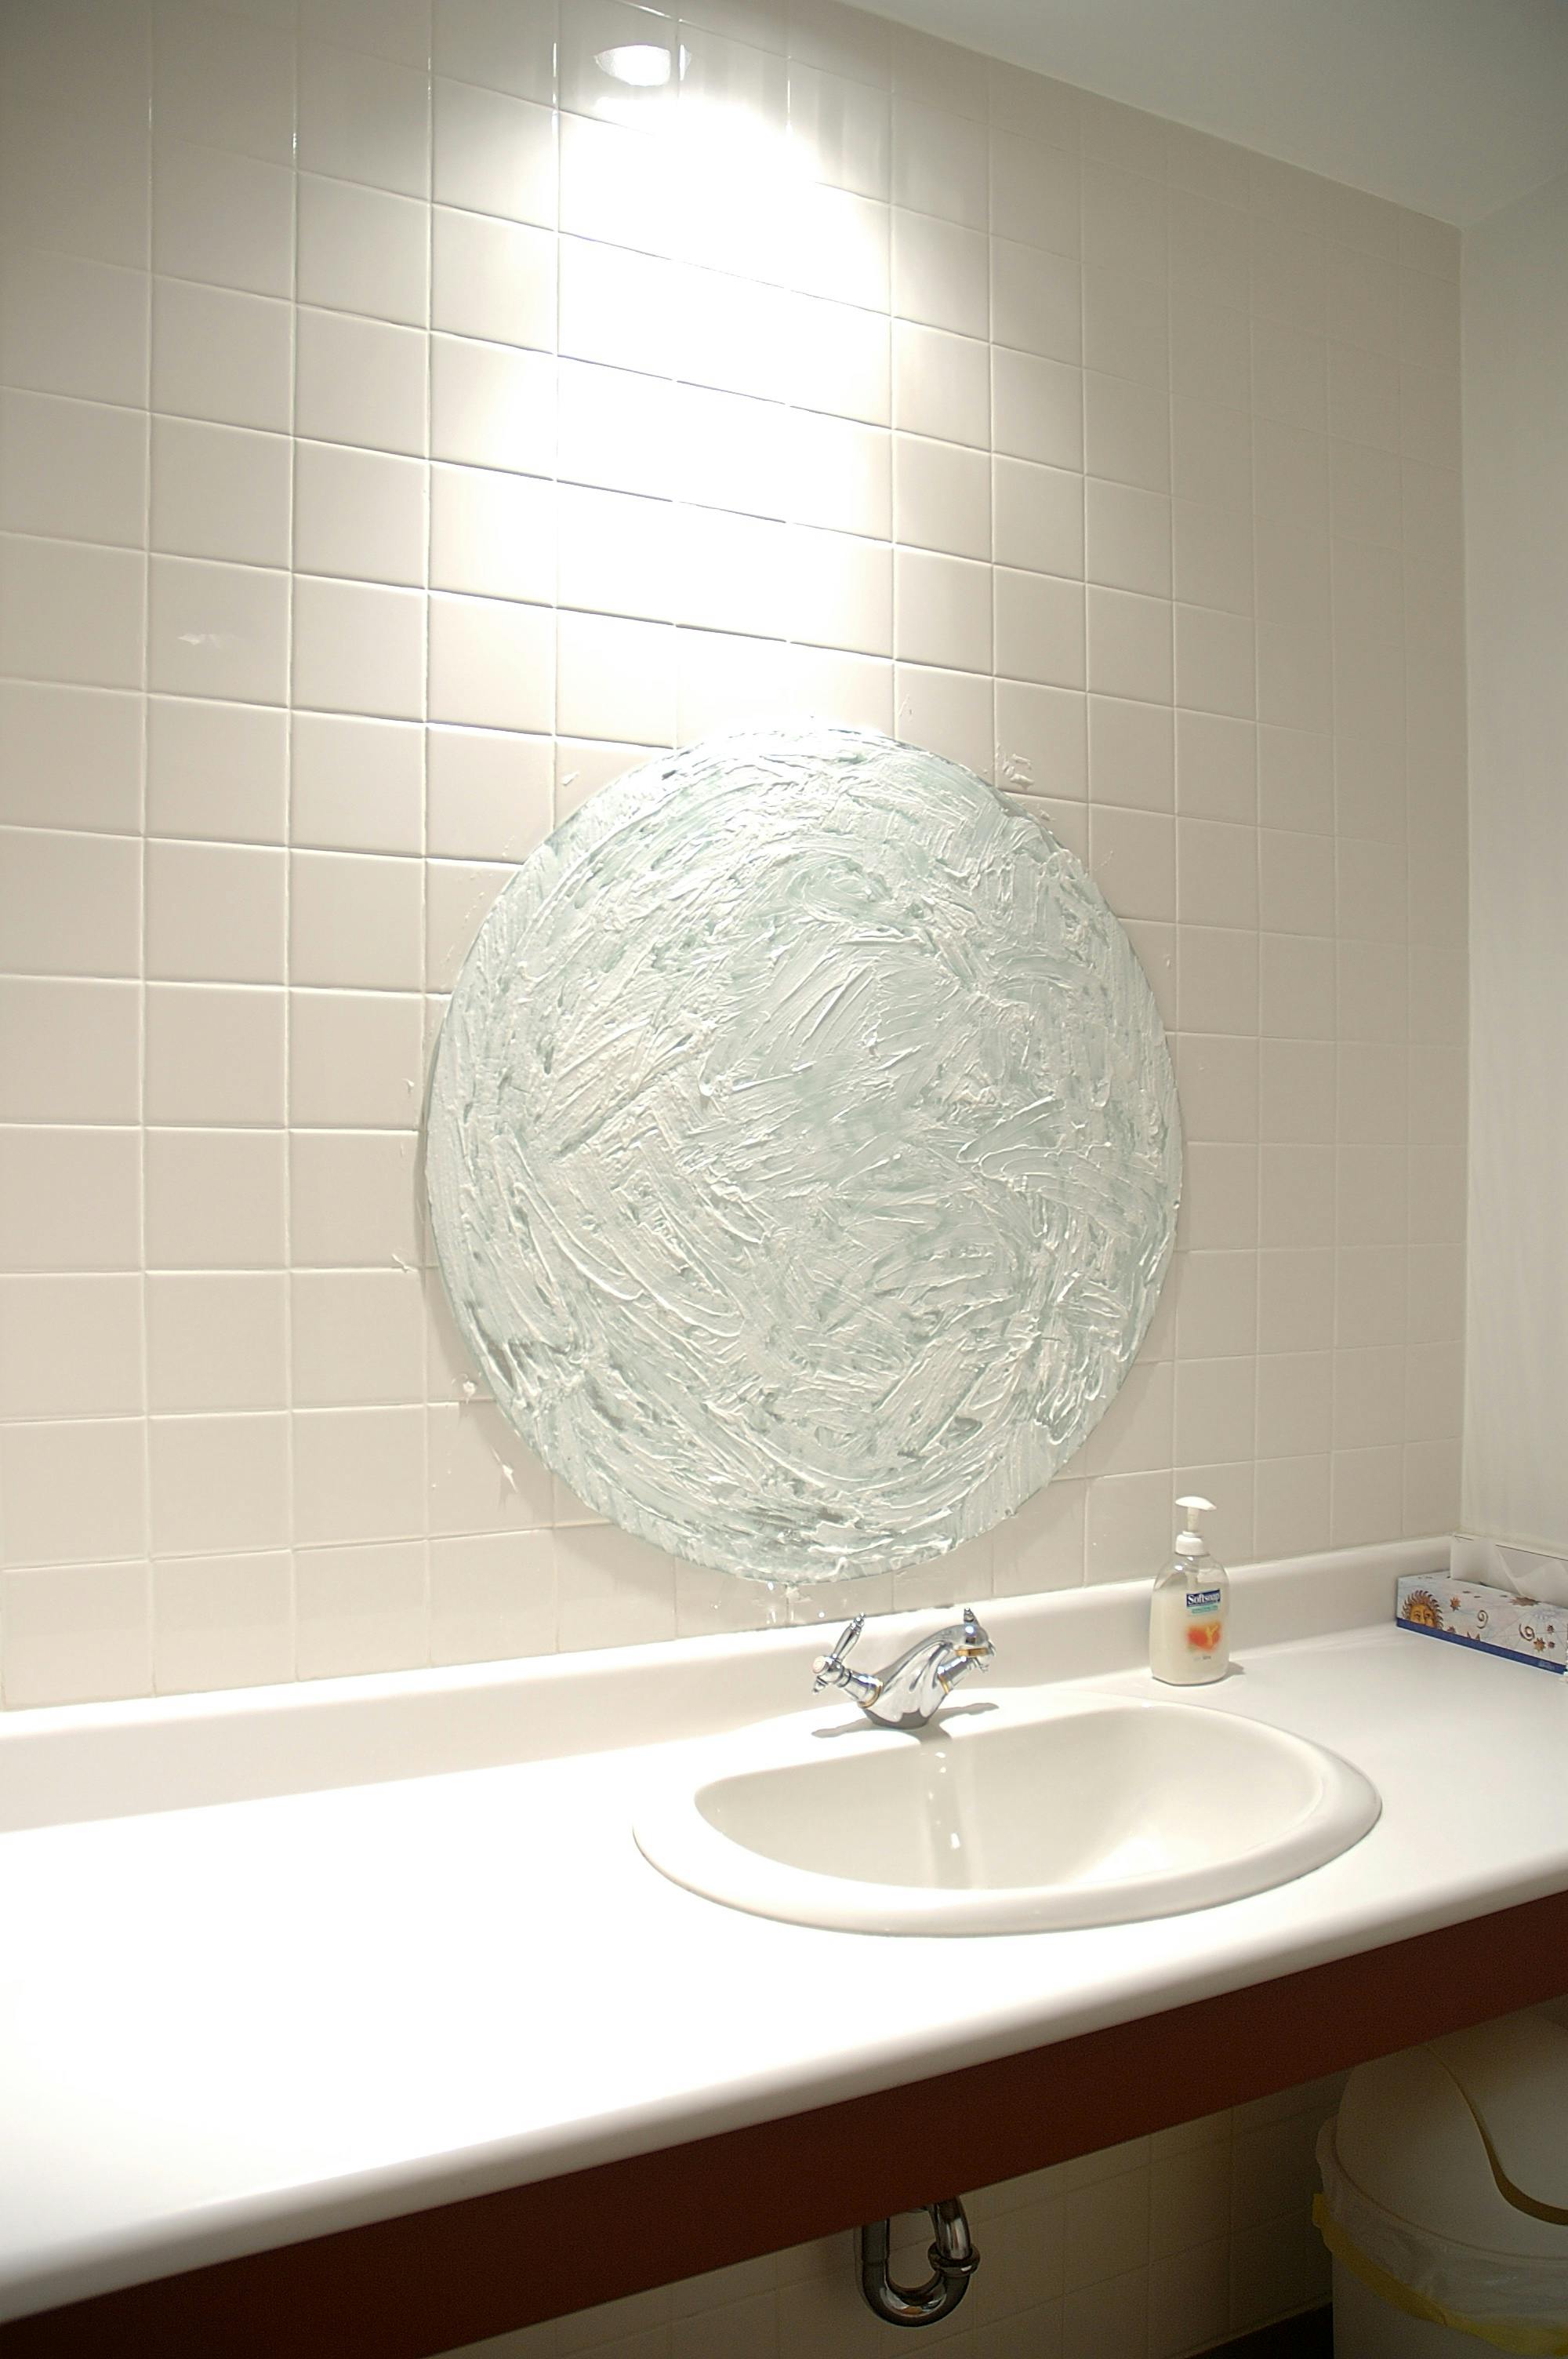 An installation image of a circular-shaped mirror above a sink. The mirror is entirely covered with a white soap-like form. 